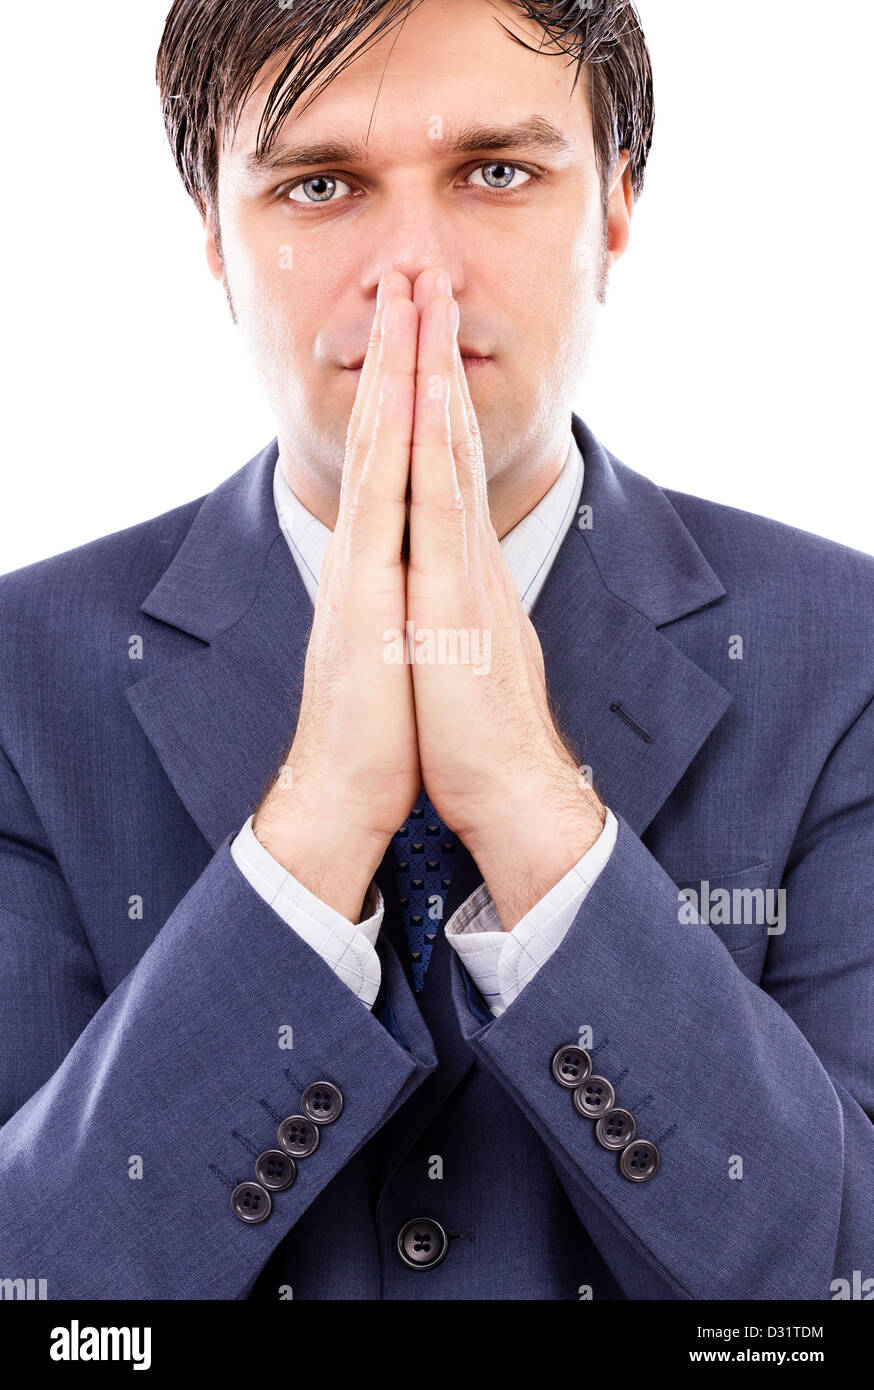 Serious businessman holding both hands in front of his mouth against white Stock Photo